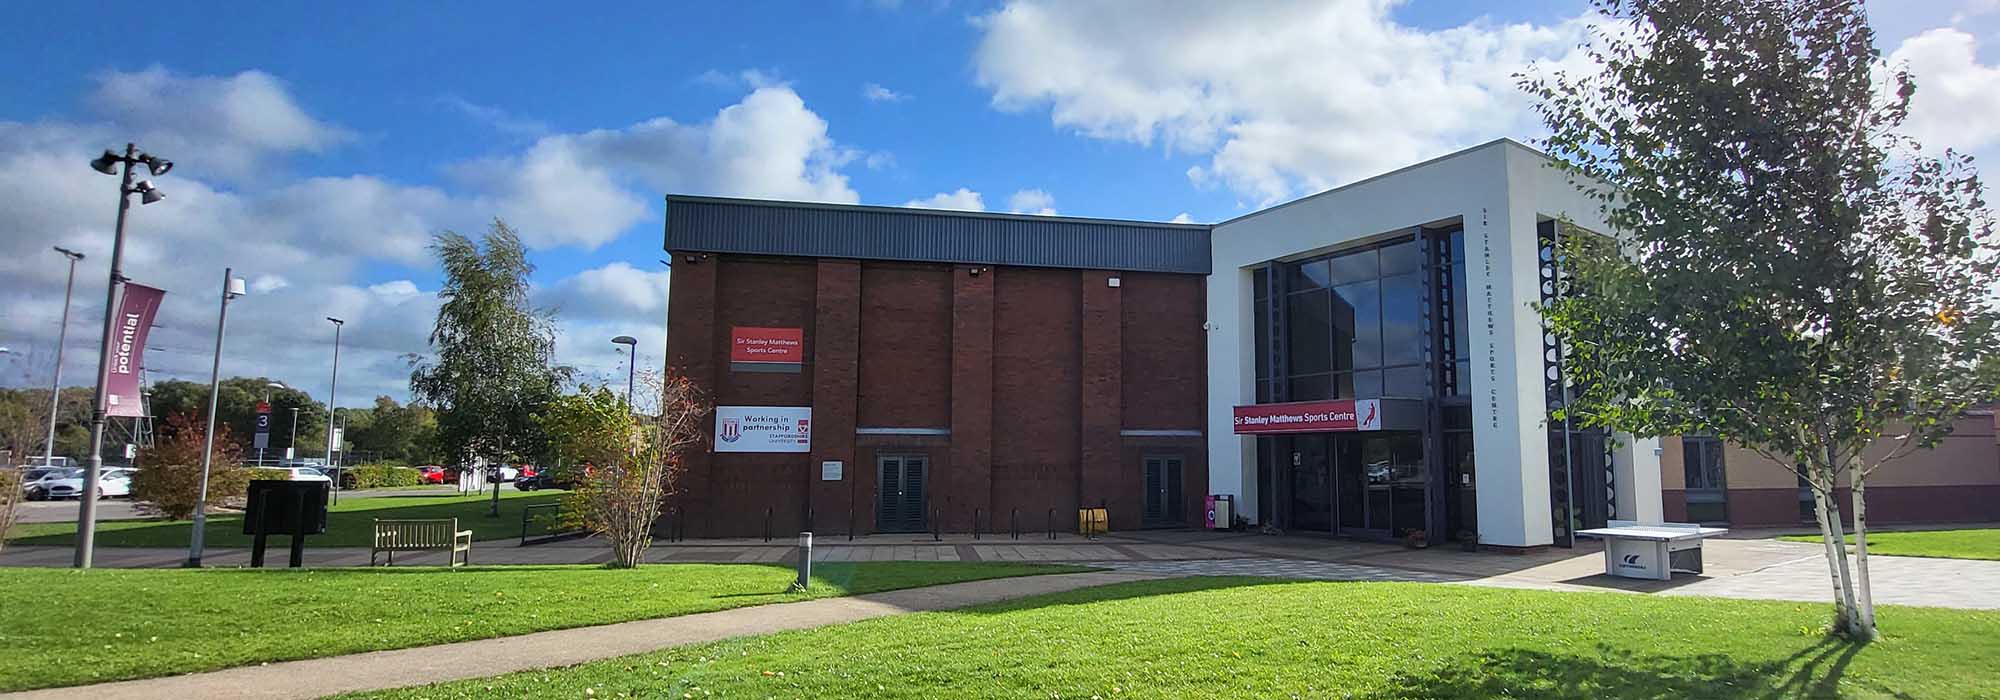 Main entrance of the Sir Stanley Matthews Sports Centre